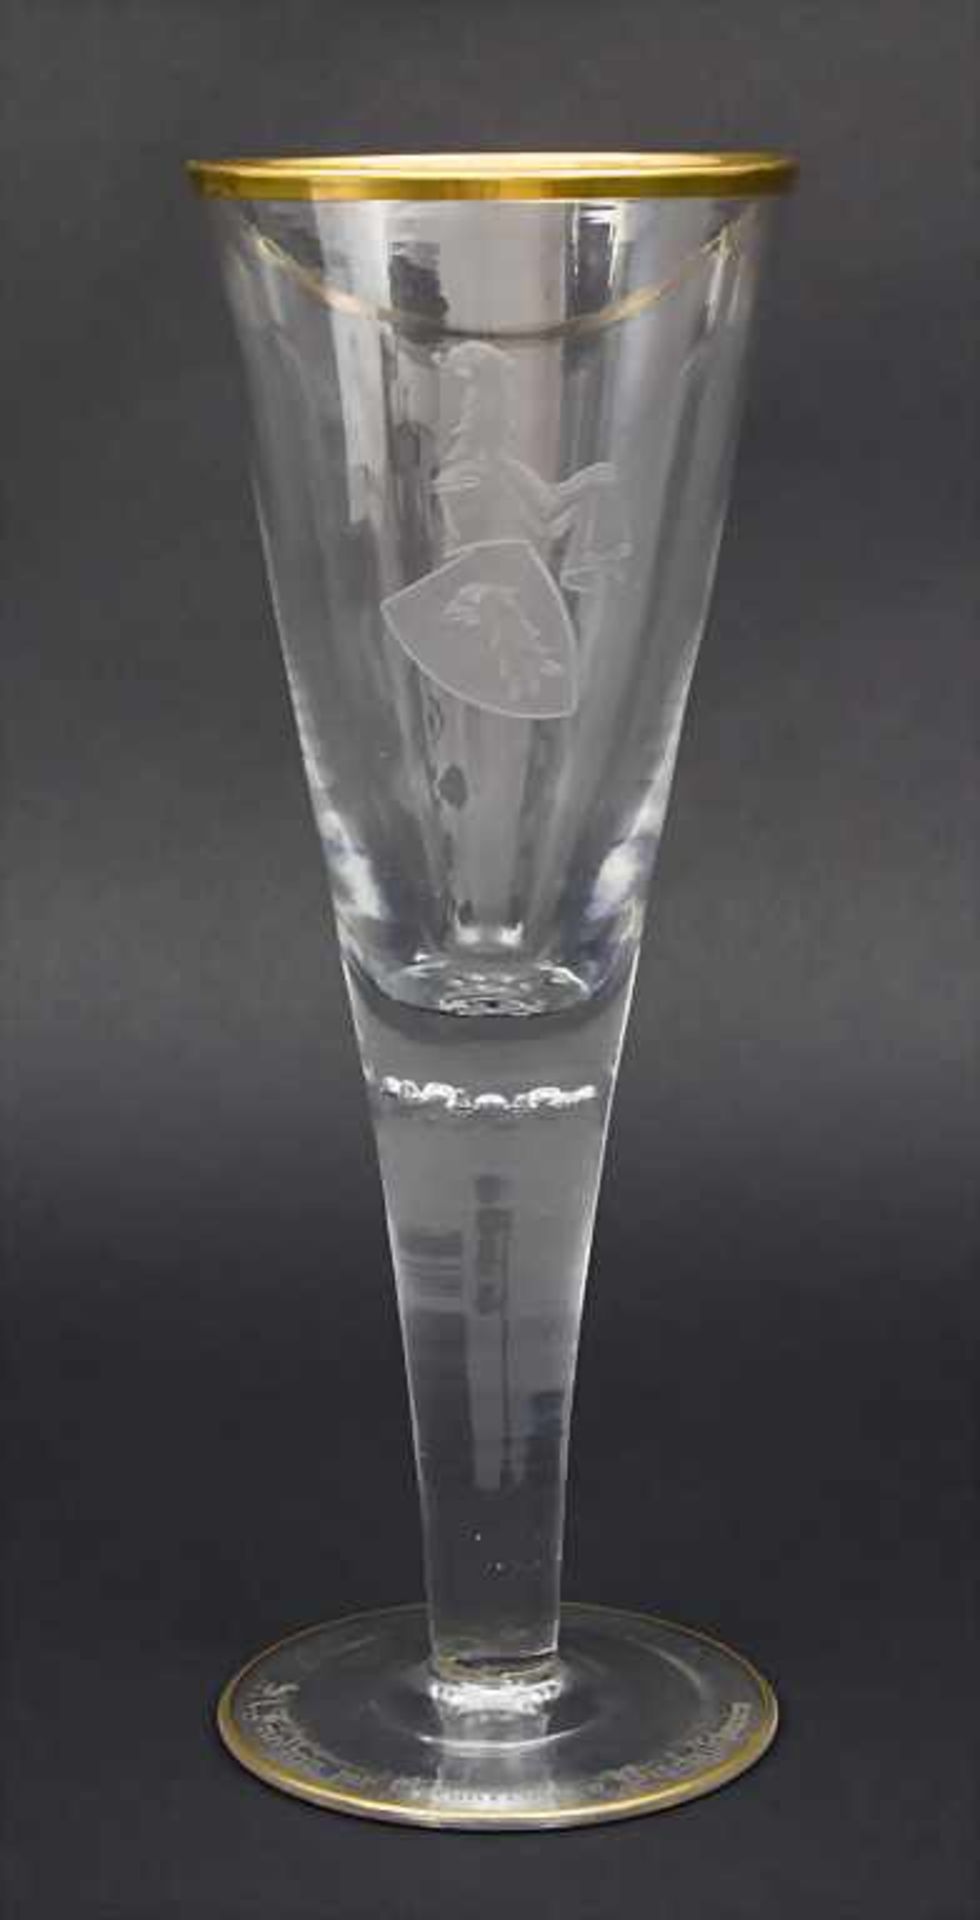 Großes Pokalglas mit Familienwappen / Huge Goblet with Family Coat of Arms, 19. Jh. Material: